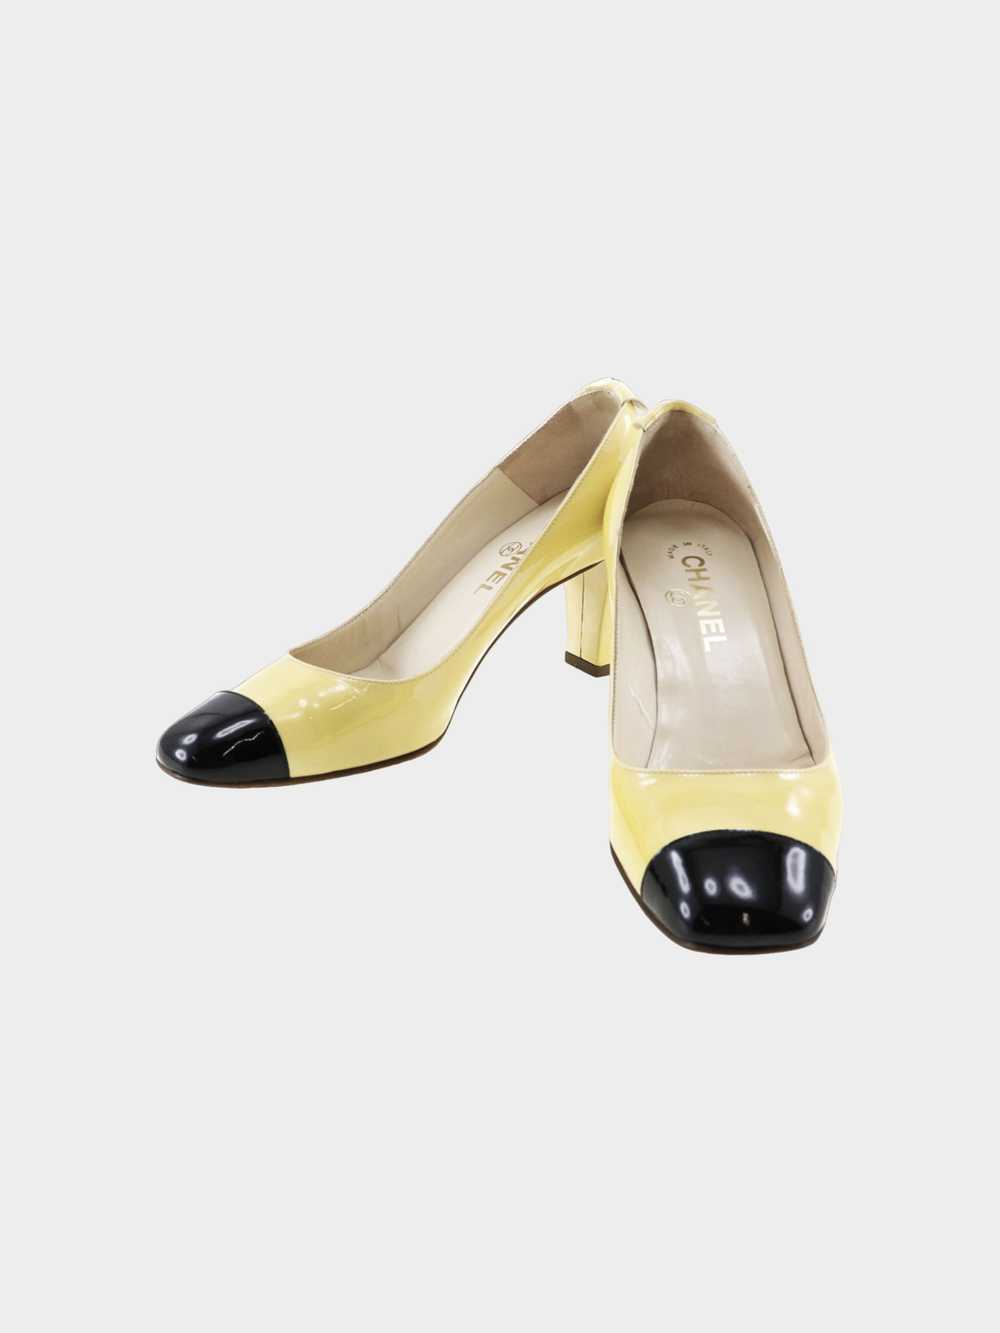 Chanel 2000s Black and Beige Two-toned Pumps - image 2